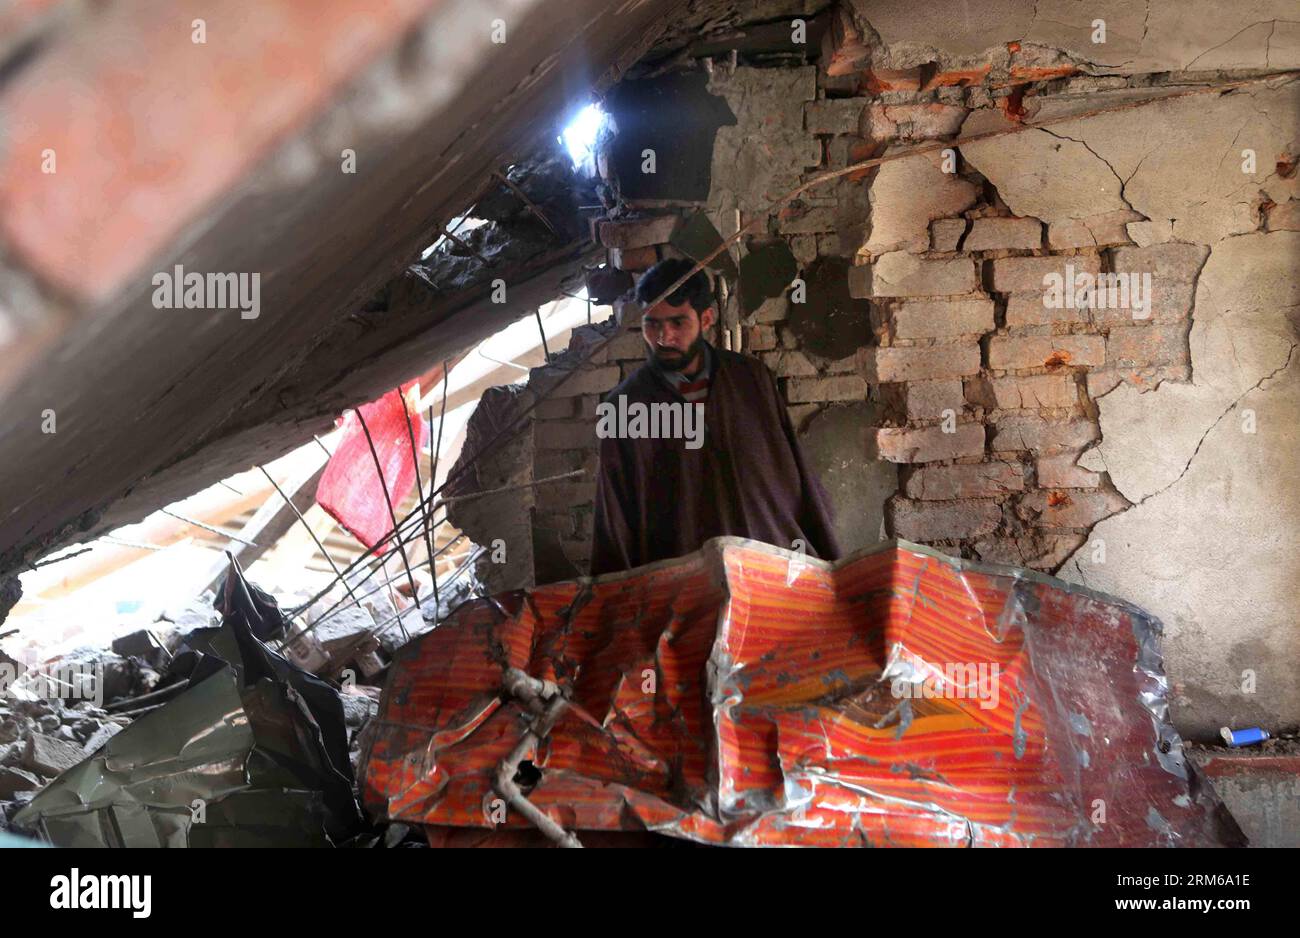 (131226) -- SRINAGAR, Dec. 26, 2013 (Xinhua) -- A Kashmiri villager searches for valuables in the rubbles of a destroyed house after gunfight in village Hushroo, some 30 km south of Srinagar, the summer capital of Indian-controlled Kashmir, Dec. 26, 2013. A militant commander of Lashkar-e-Toiba (LeT) was killed Thursday in a fierce overnight gunfight with Indian troops in Indian- controlled Kashmir, police said. (Xinhua/Javed Dar) KASHMIR-SRINAGAR-GUNFIGHT PUBLICATIONxNOTxINxCHN   Srinagar DEC 26 2013 XINHUA a Kashmiri village searches for valuables in The Rubble of a destroyed House After Gun Stock Photo